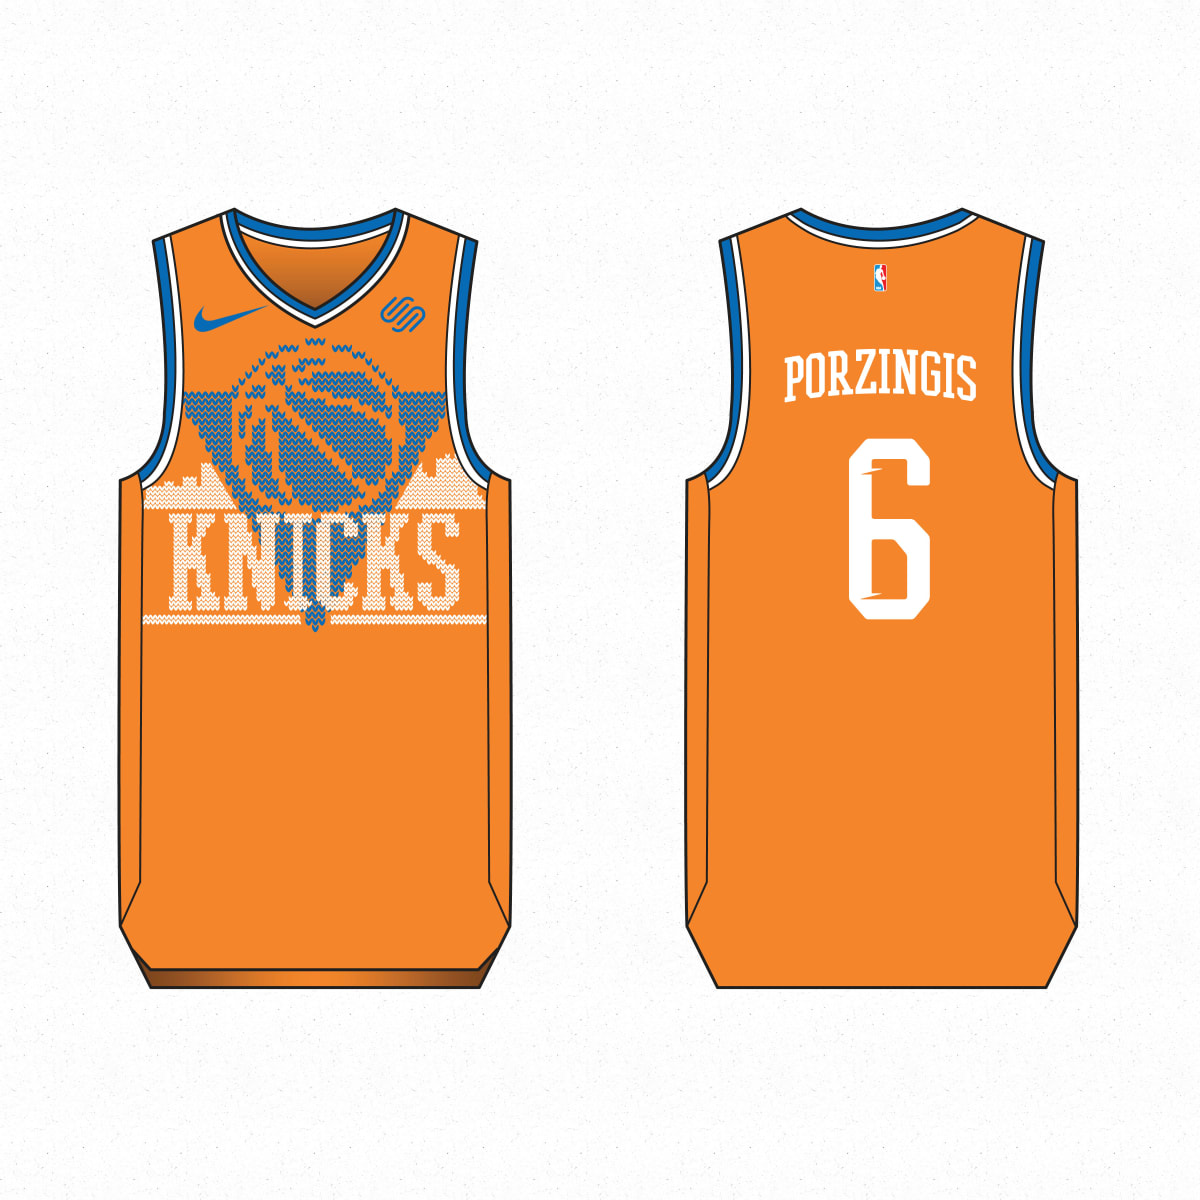 No One Is Happy About Nike's Decision To Forgo NBA Christmas Jerseys